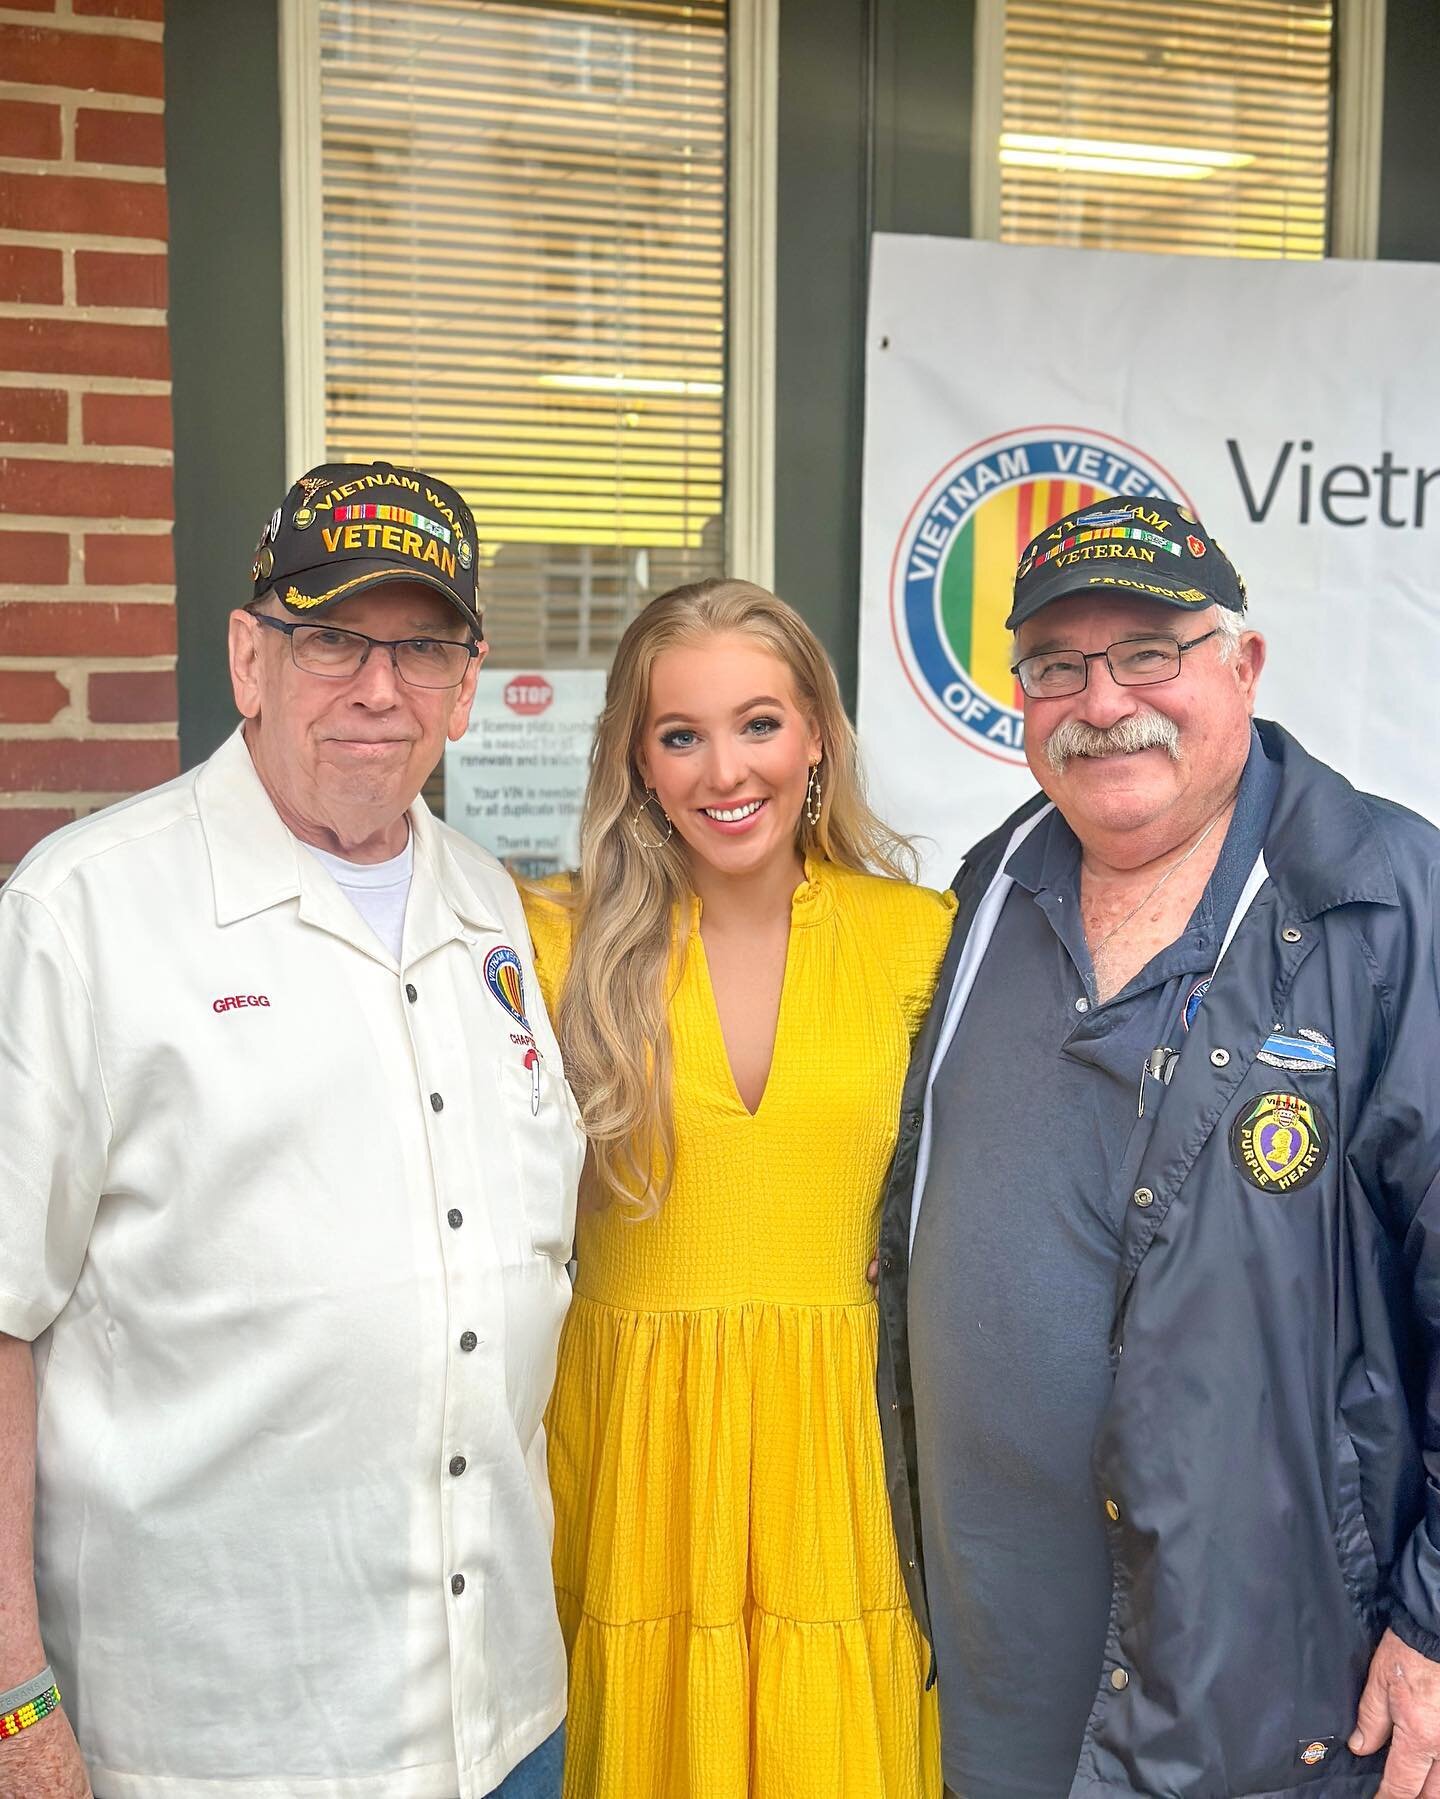 On the Columbia Square with Vietnam Veterans of America Chapter 1140!💛 Love this amazing group! #vietnamveterans